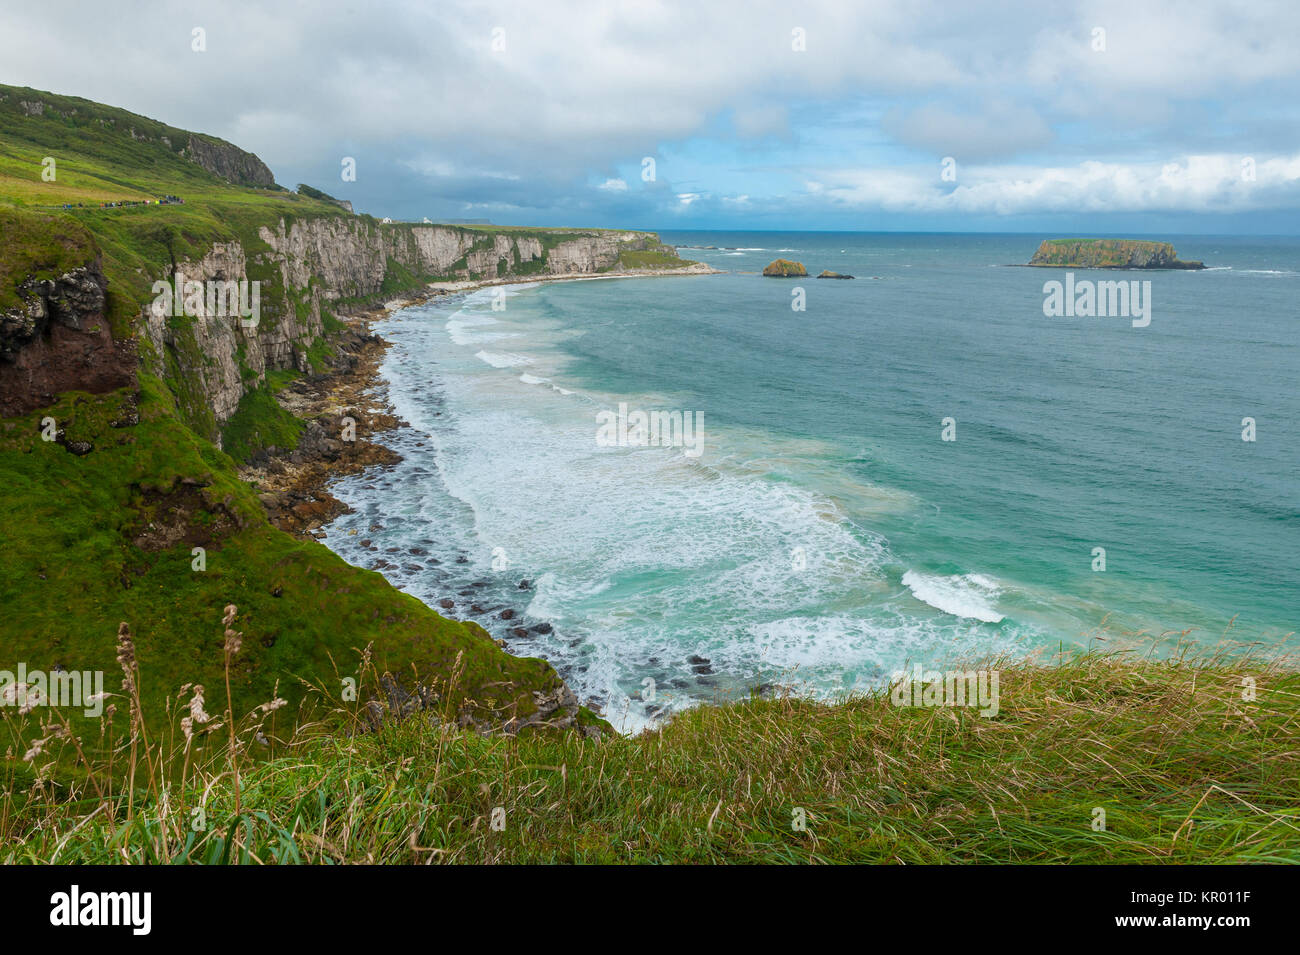 View of Irish coast with high cliffs and ocean at Carrick-a-Rede coastal walk Ballycastle, Northern Ireland, UK Stock Photo